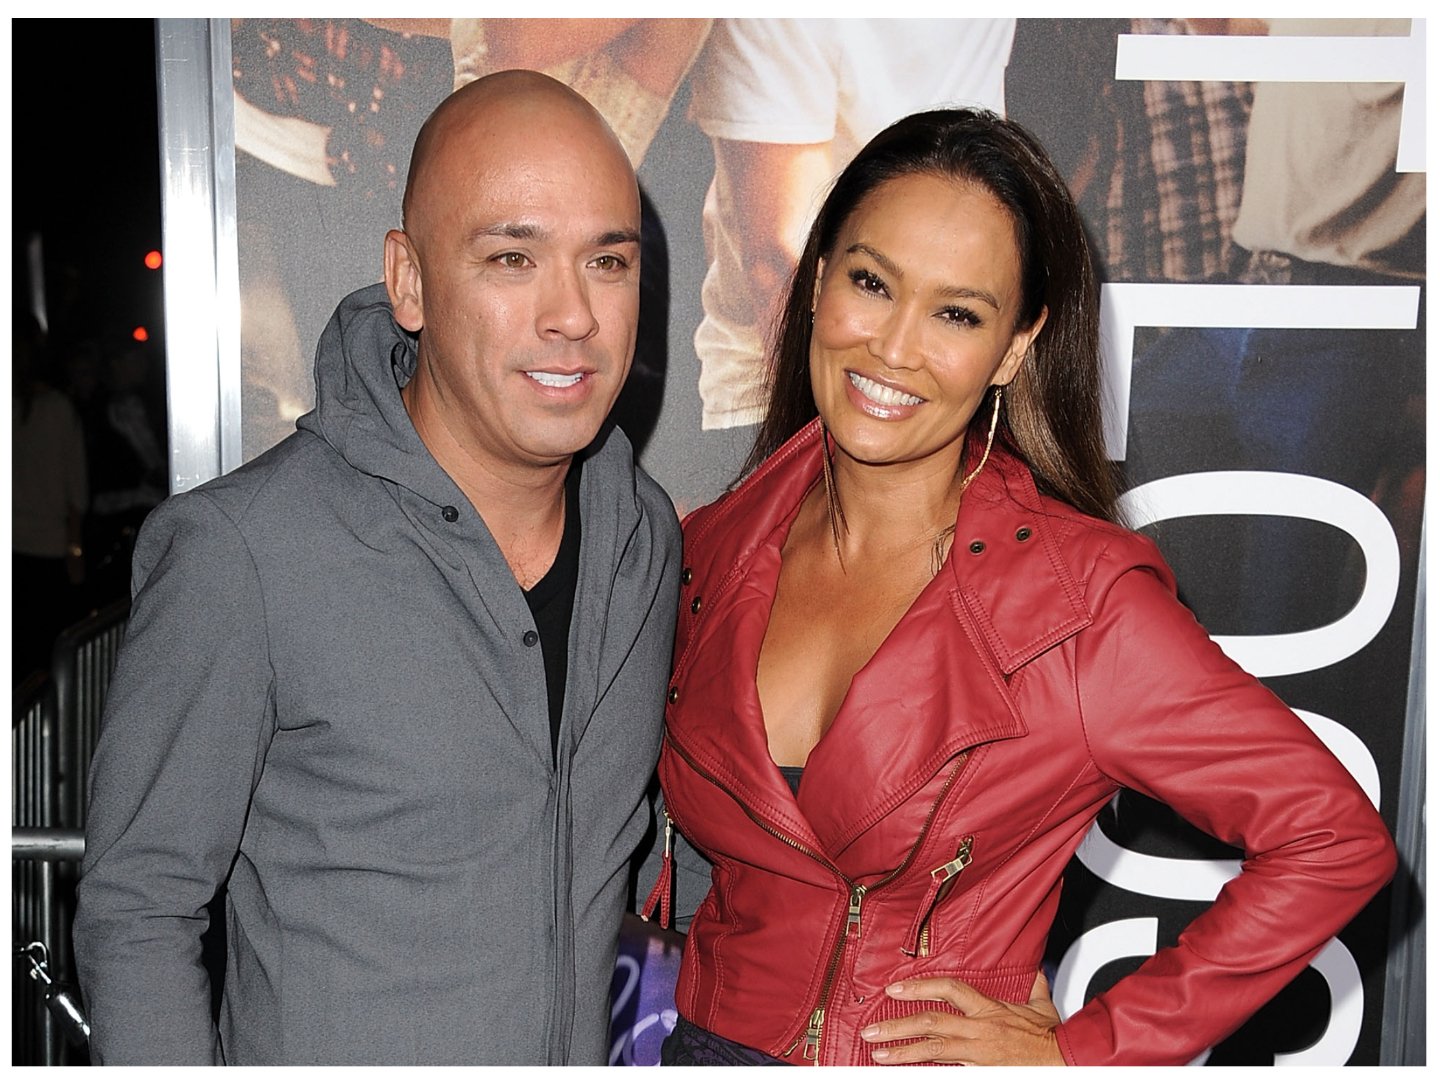 Jo Koy's Sweet Connection to 'Easter Sunday' Star Tia Carrere – How She Inspired Him When He Was a Hotel Front Desk Clerk [Exclusive]